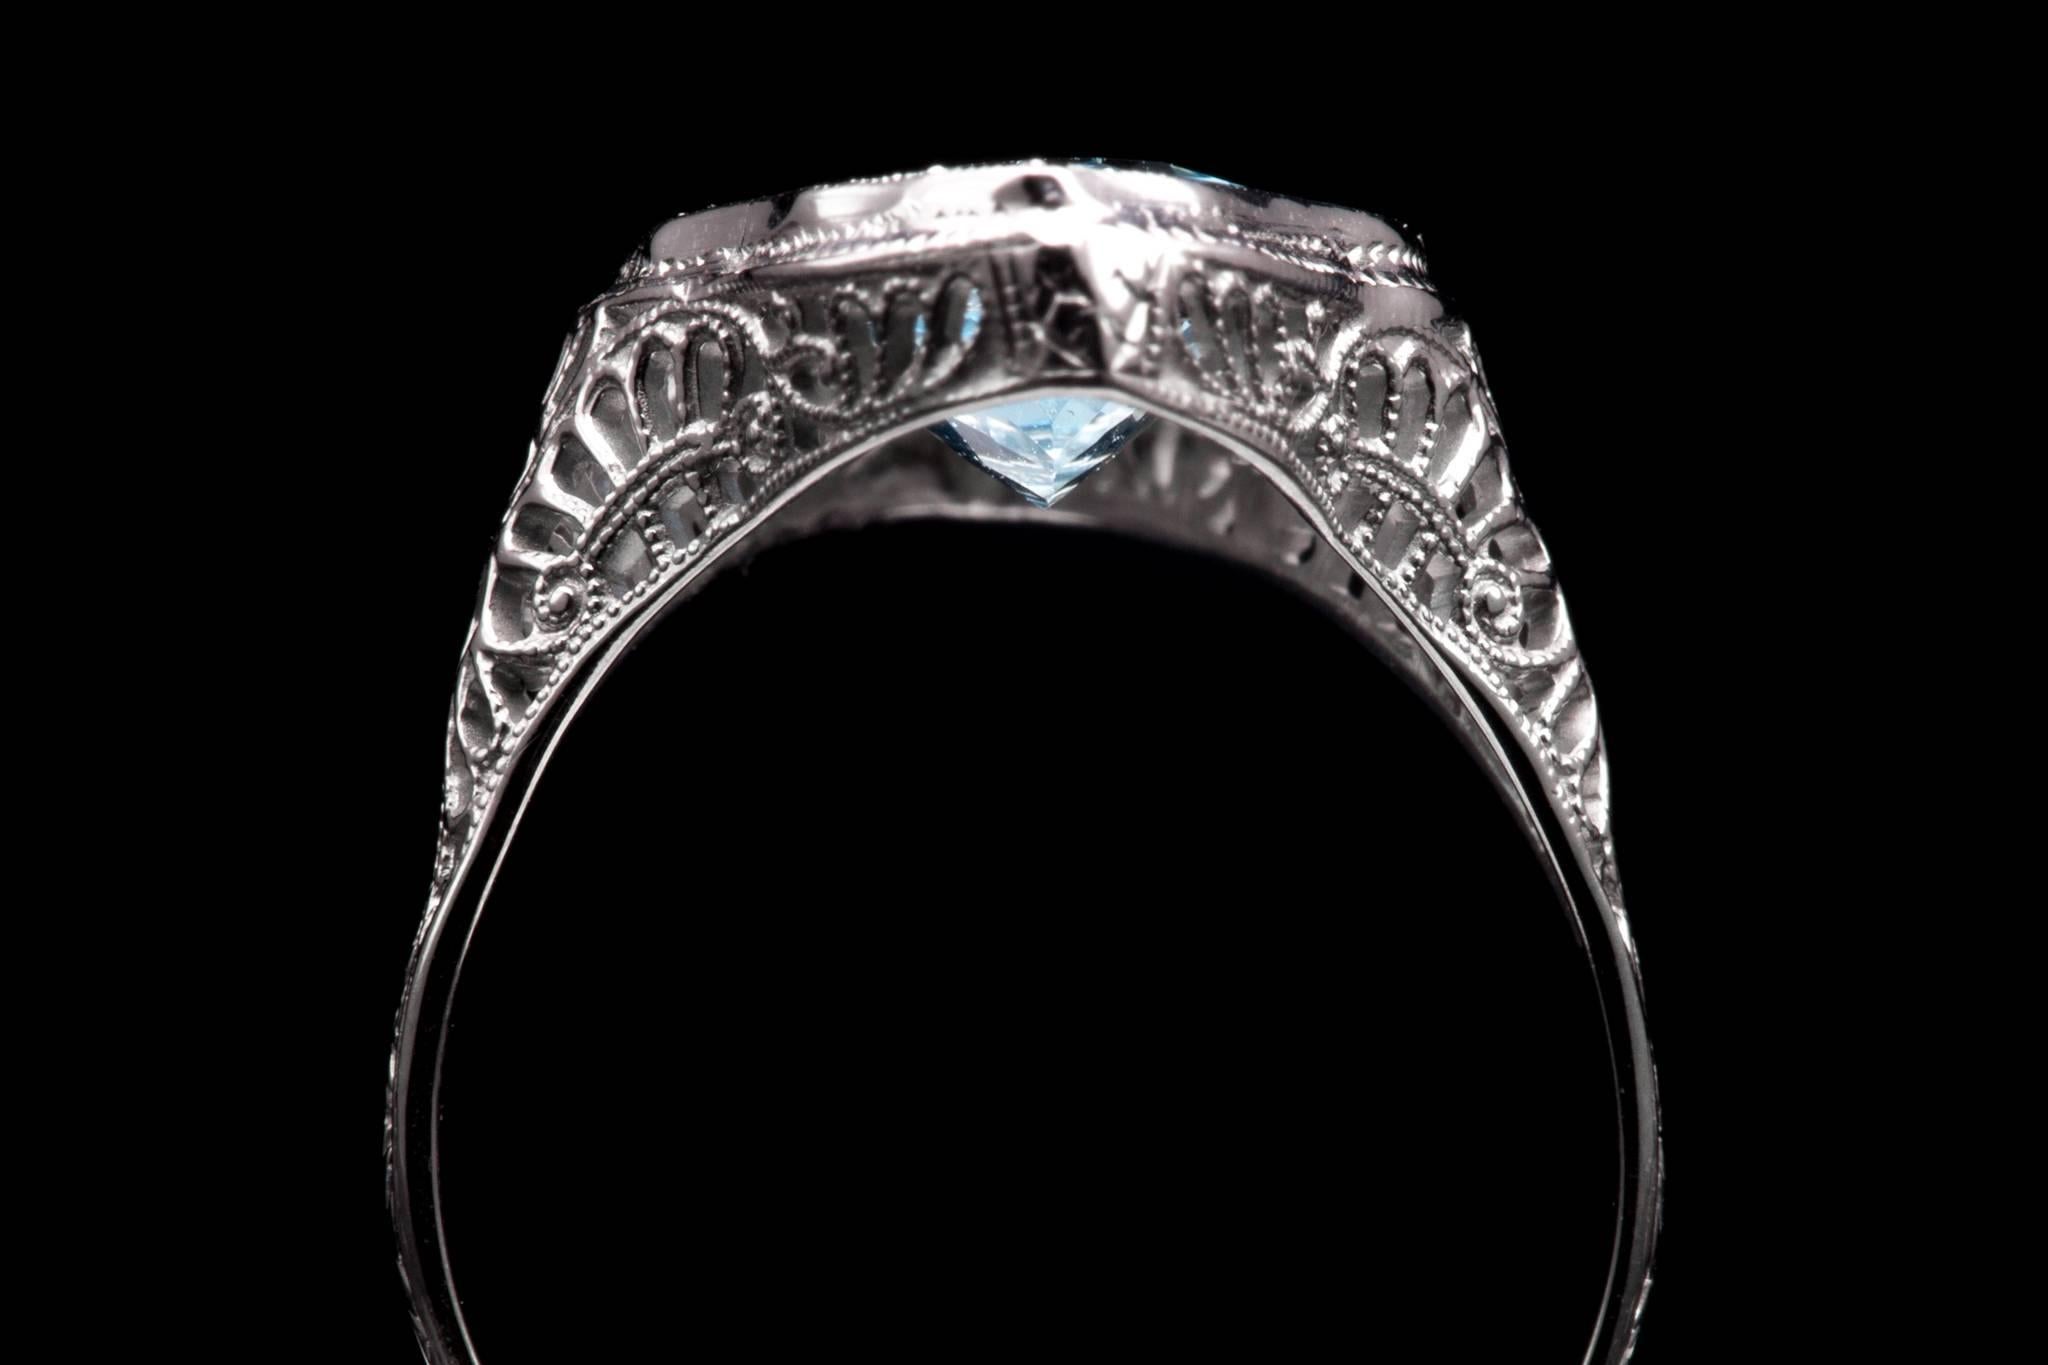 A beautiful art deco period diamond and aquamarine ring in 18 karat white gold.  Featuring hand pierced filigree and milligram detailing throughout this ring is centered by a vivacious aquamarine and a pair of antique European cut